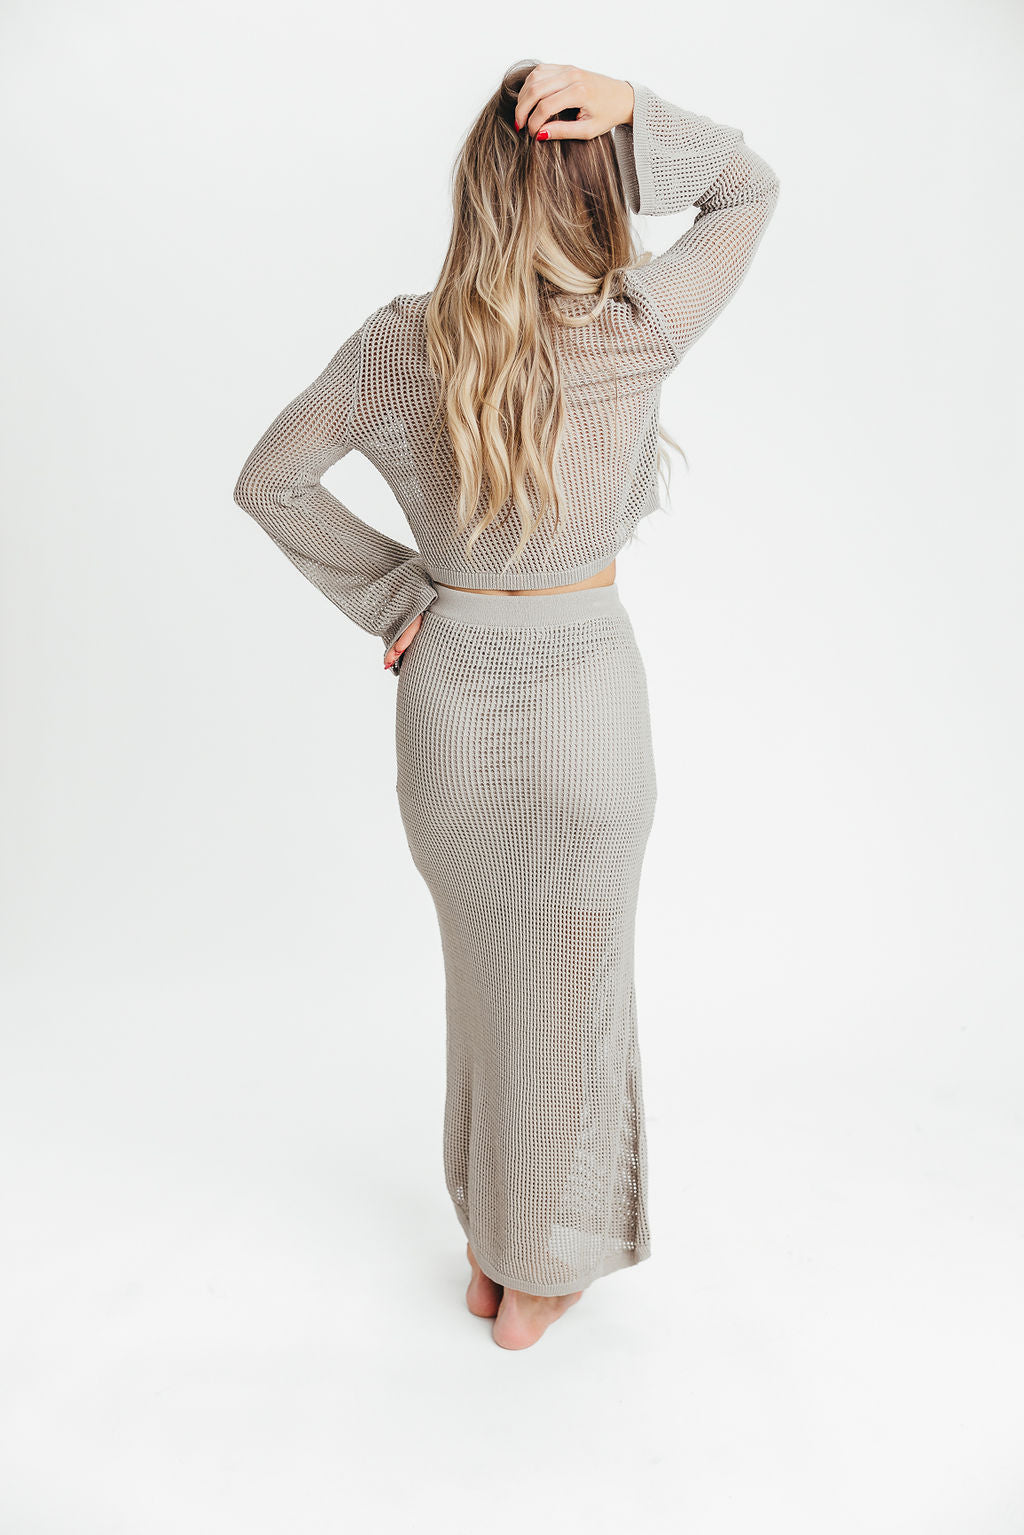 Adele Knitted Maxi Skirt and Cropped Top Set in Sage